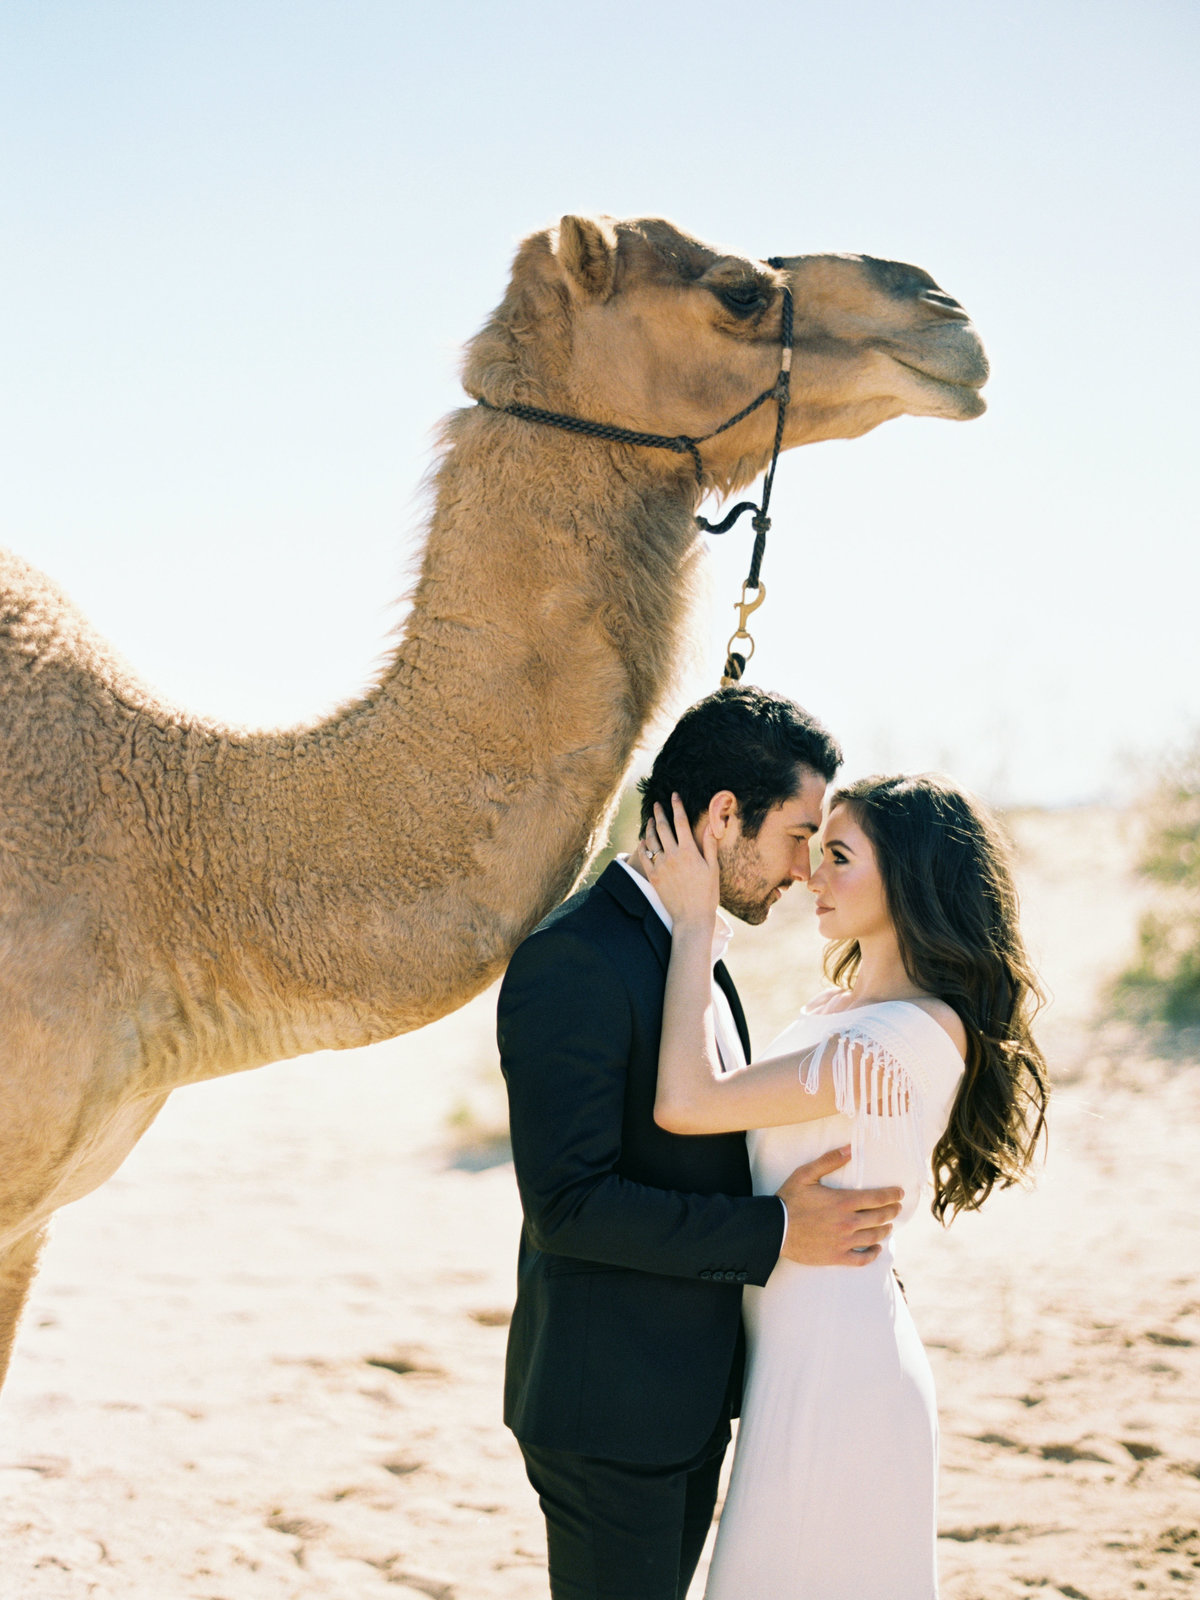 philip-casey-photography-desert-camel-editorial-session-09